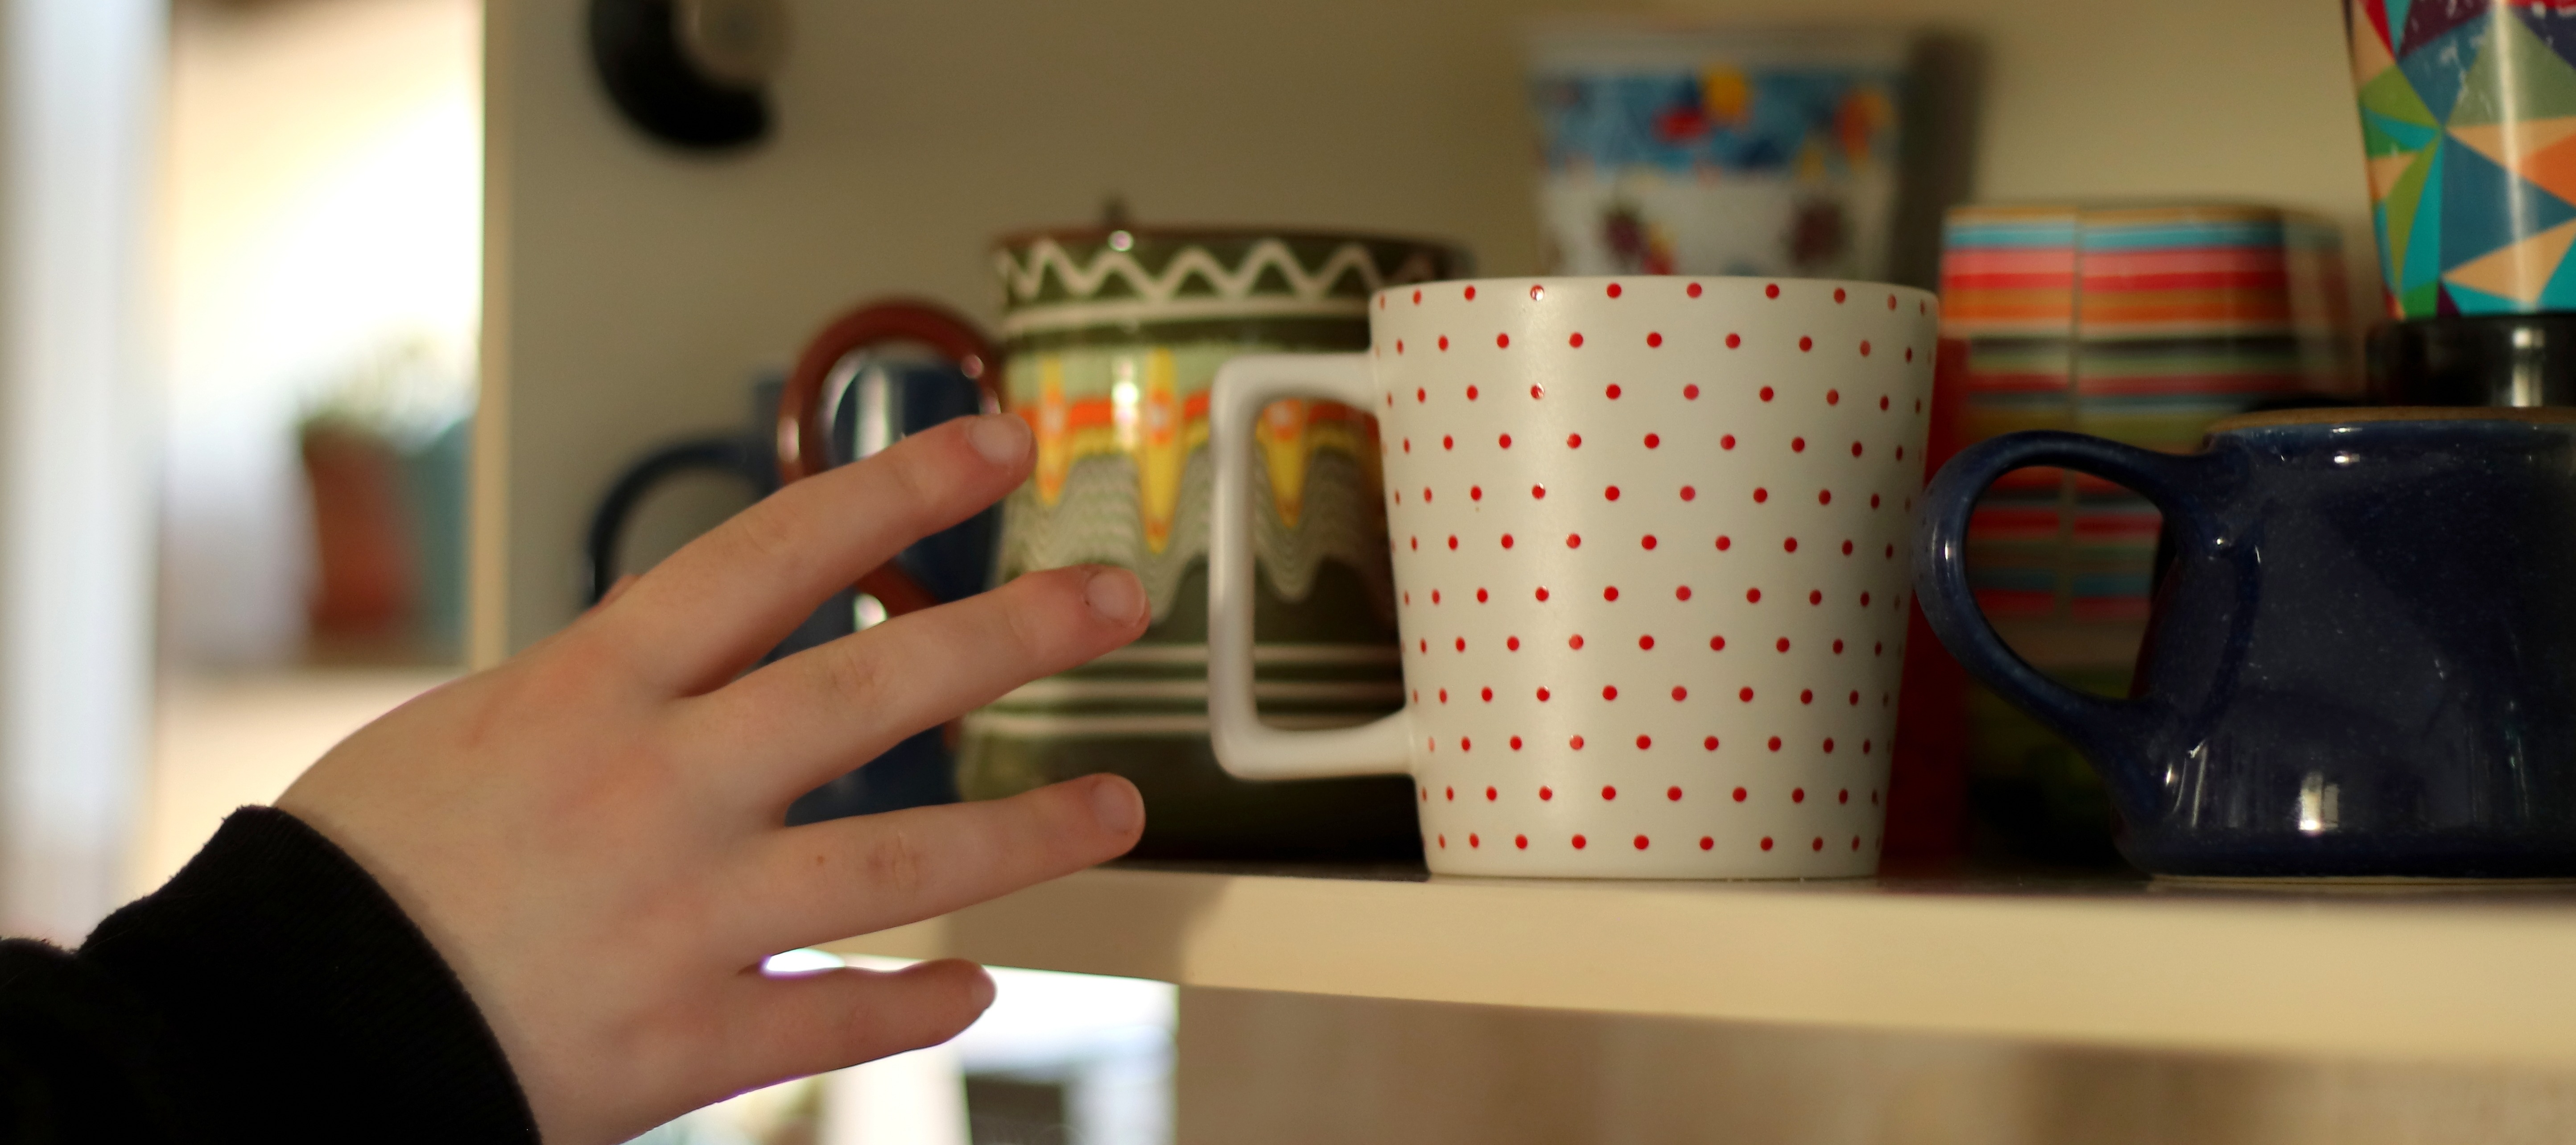 a hand reaches for a mug in a kitchen cupboard